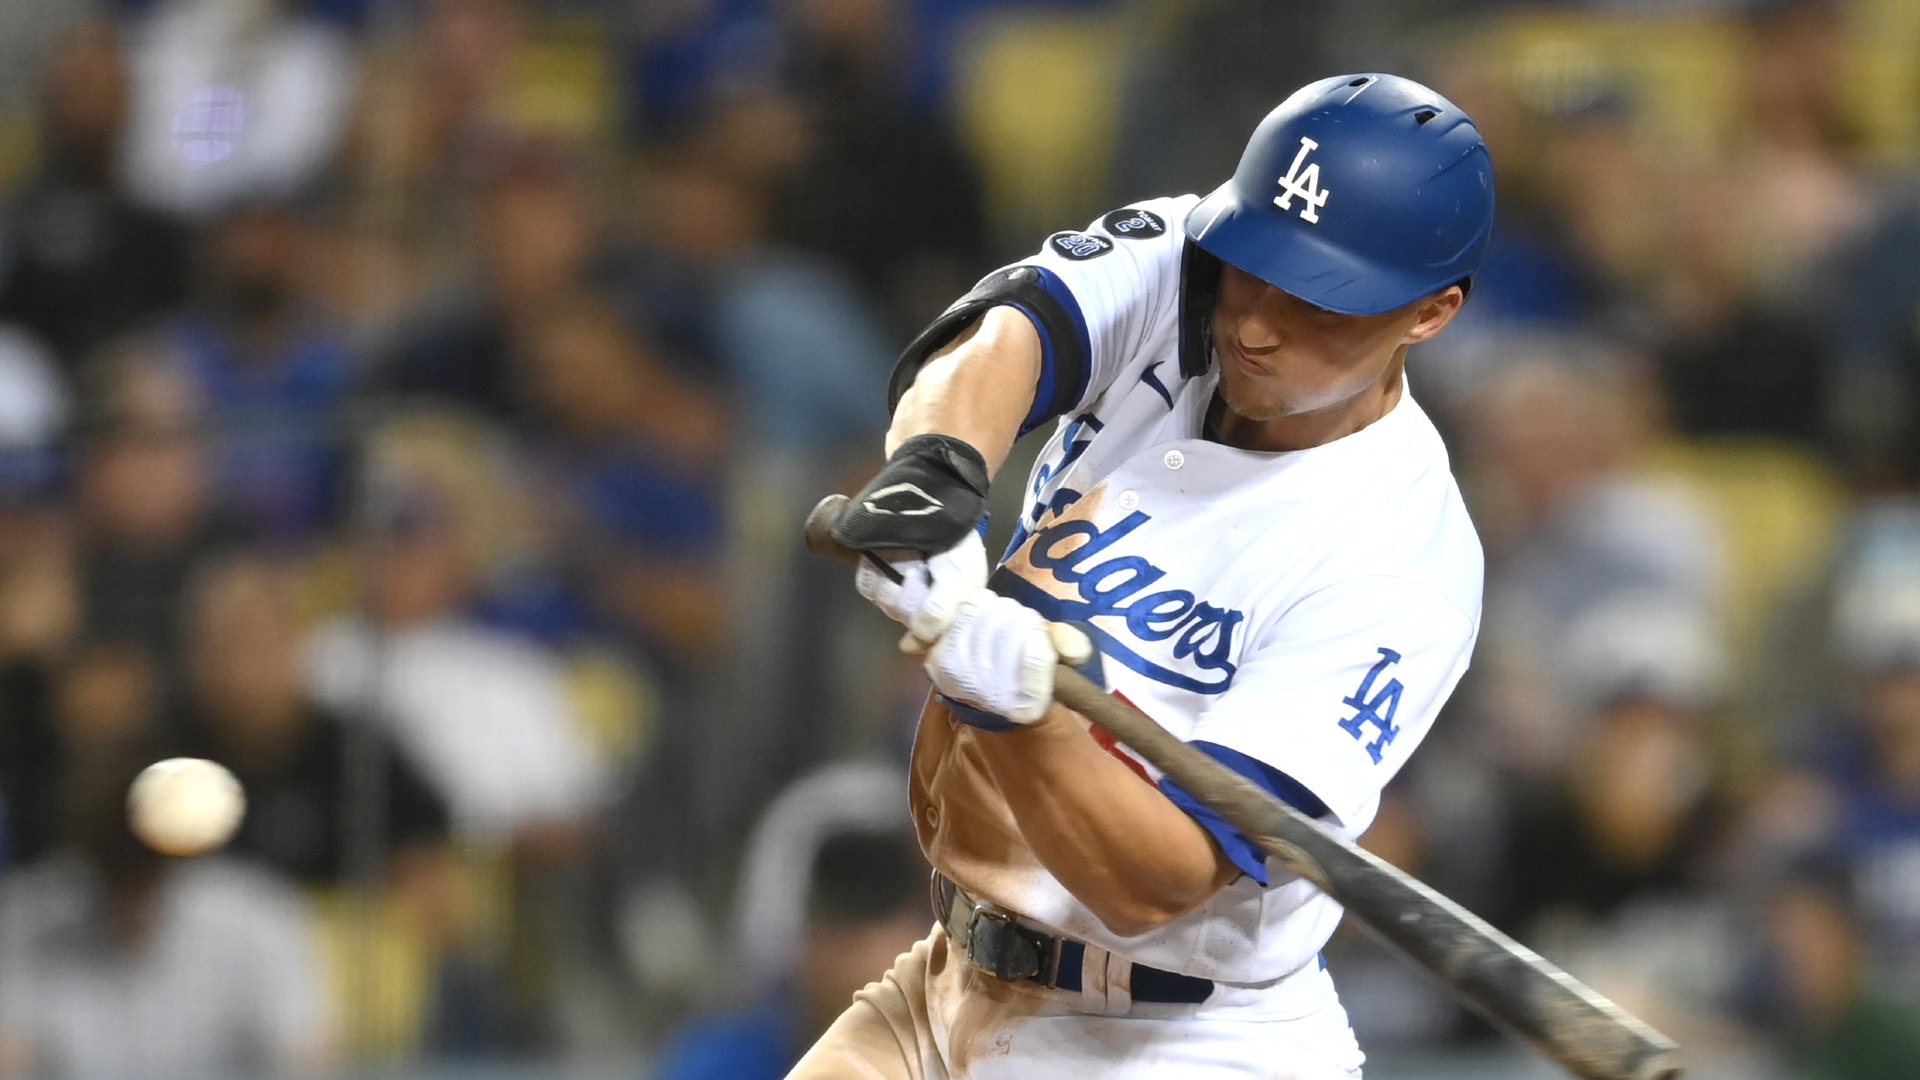 Sep 30, 2021; Los Angeles, California, USA; Los Angeles Dodgers shortstop Corey Seager (5) hits a solo home run in the seventh inning of the game against the San Diego Padres at Dodger Stadium. Mandatory Credit: Jayne Kamin-Oncea-USA TODAY Sports